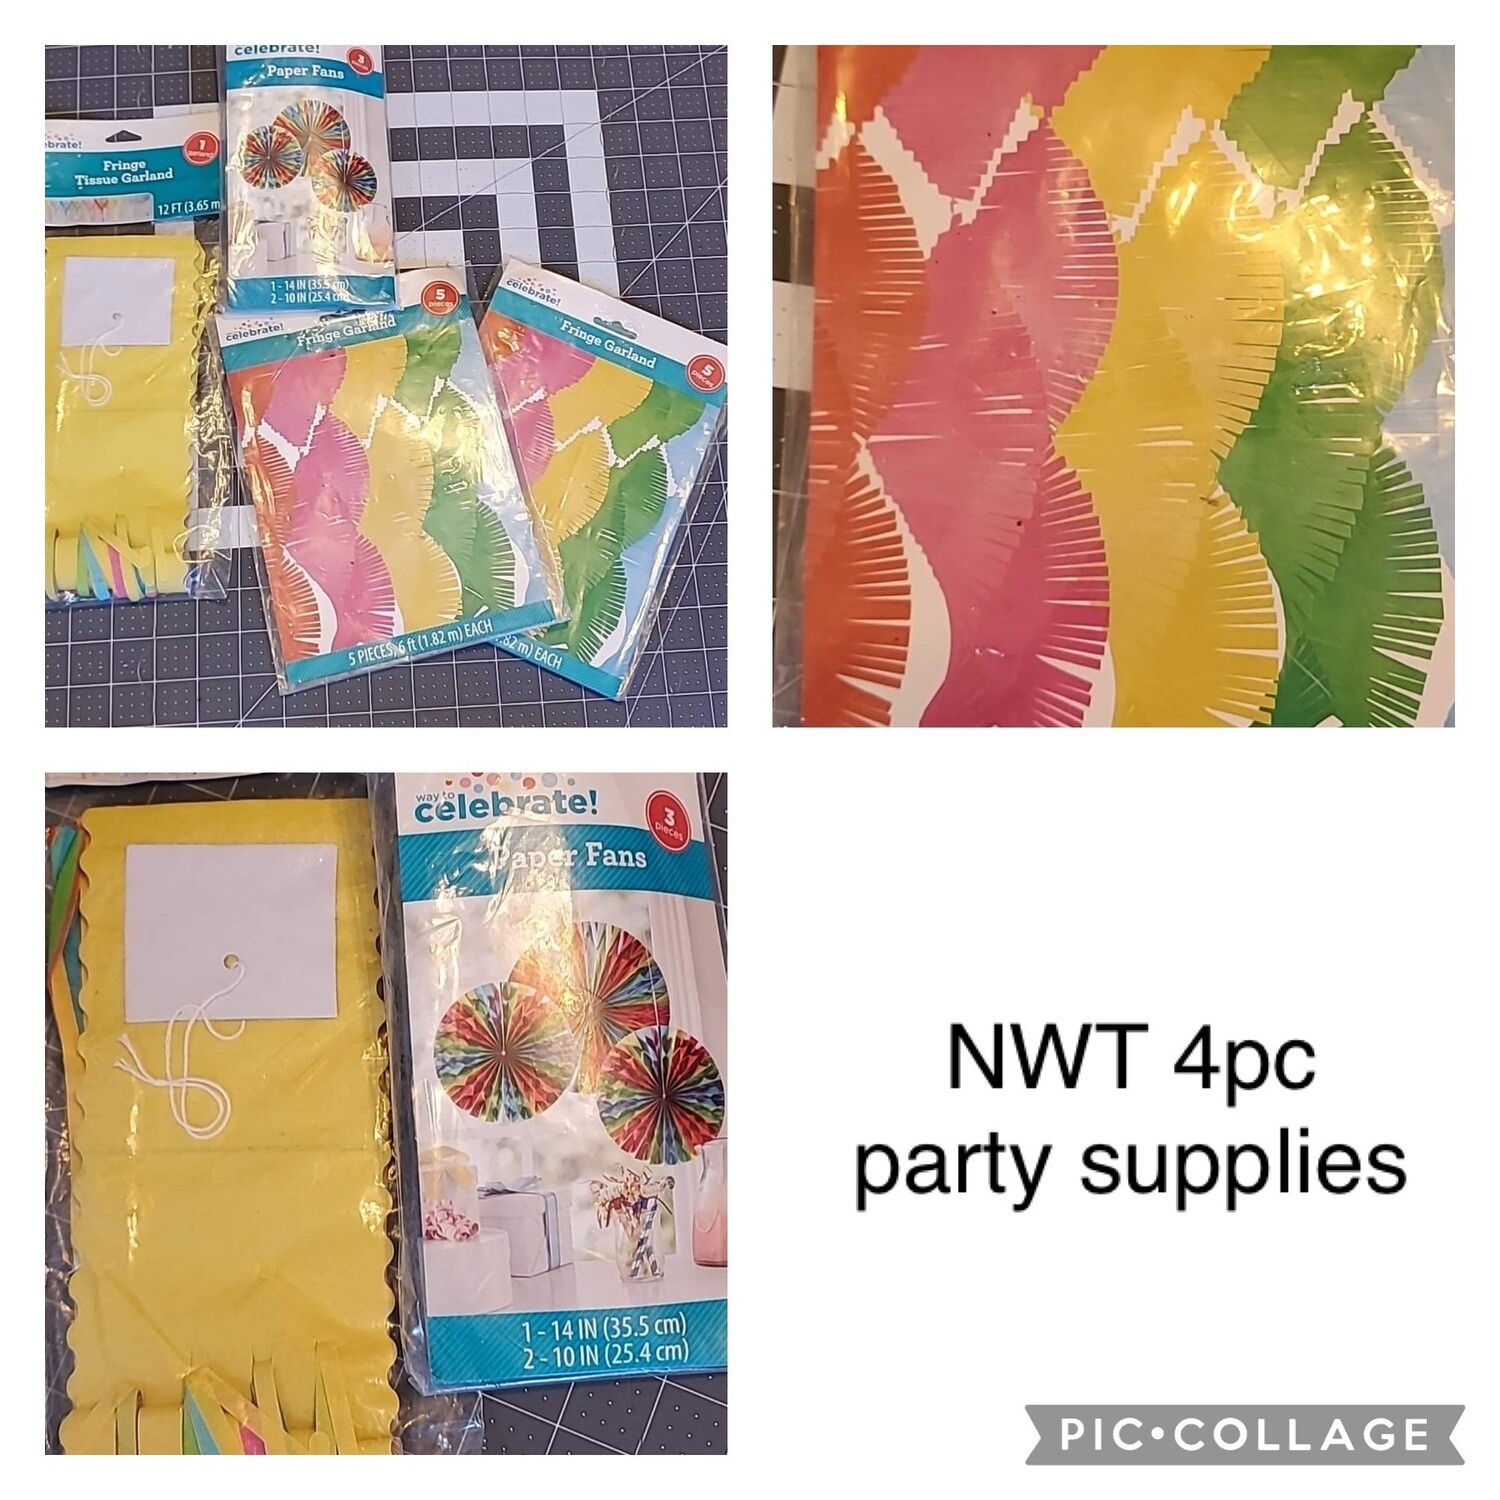 NWT 4pc party supplies